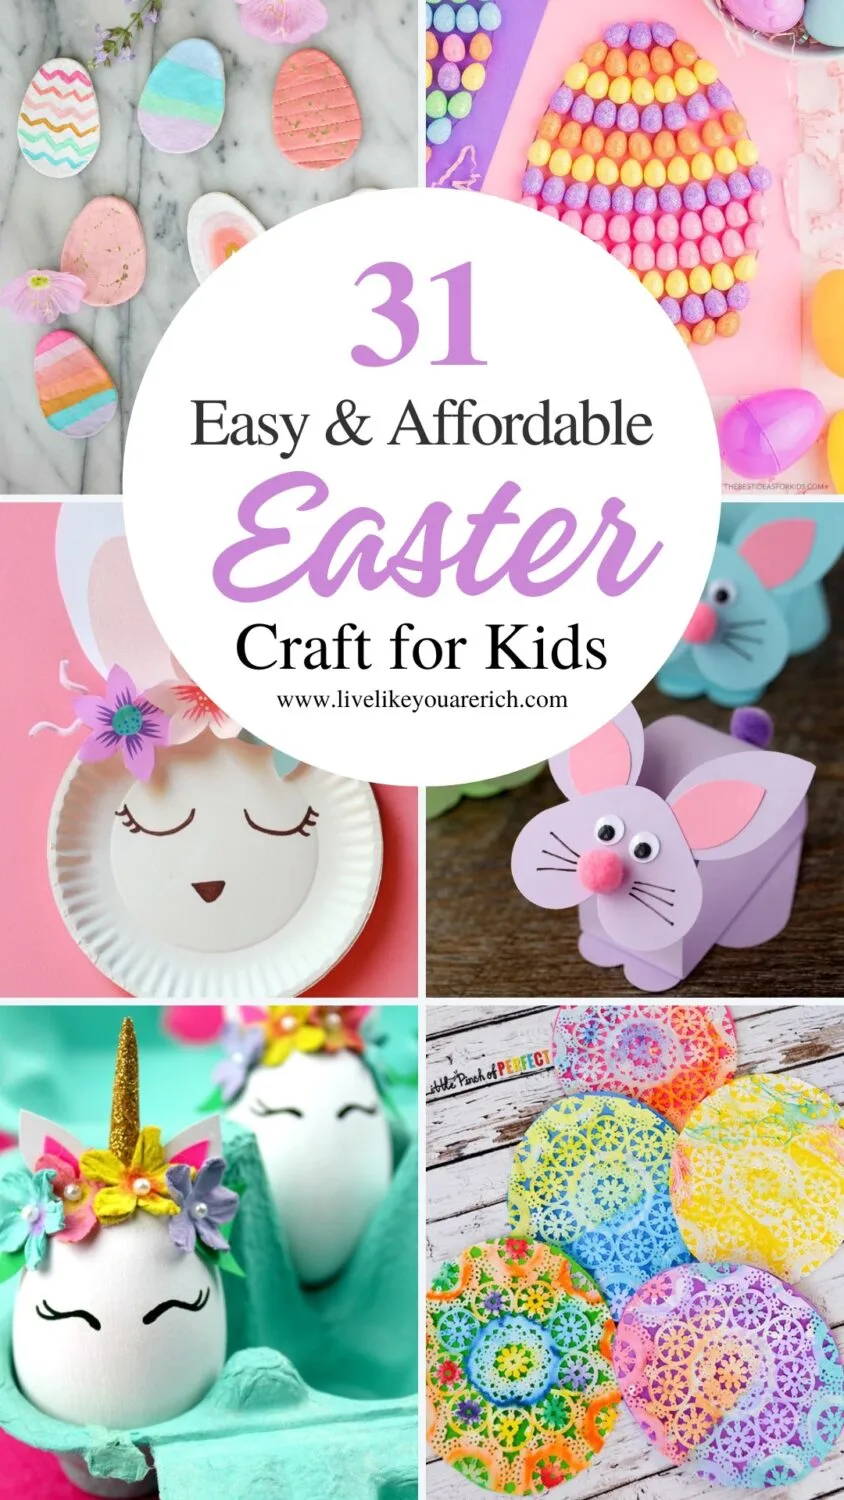 31 Easy and Affordable Easter Crafts for Kids